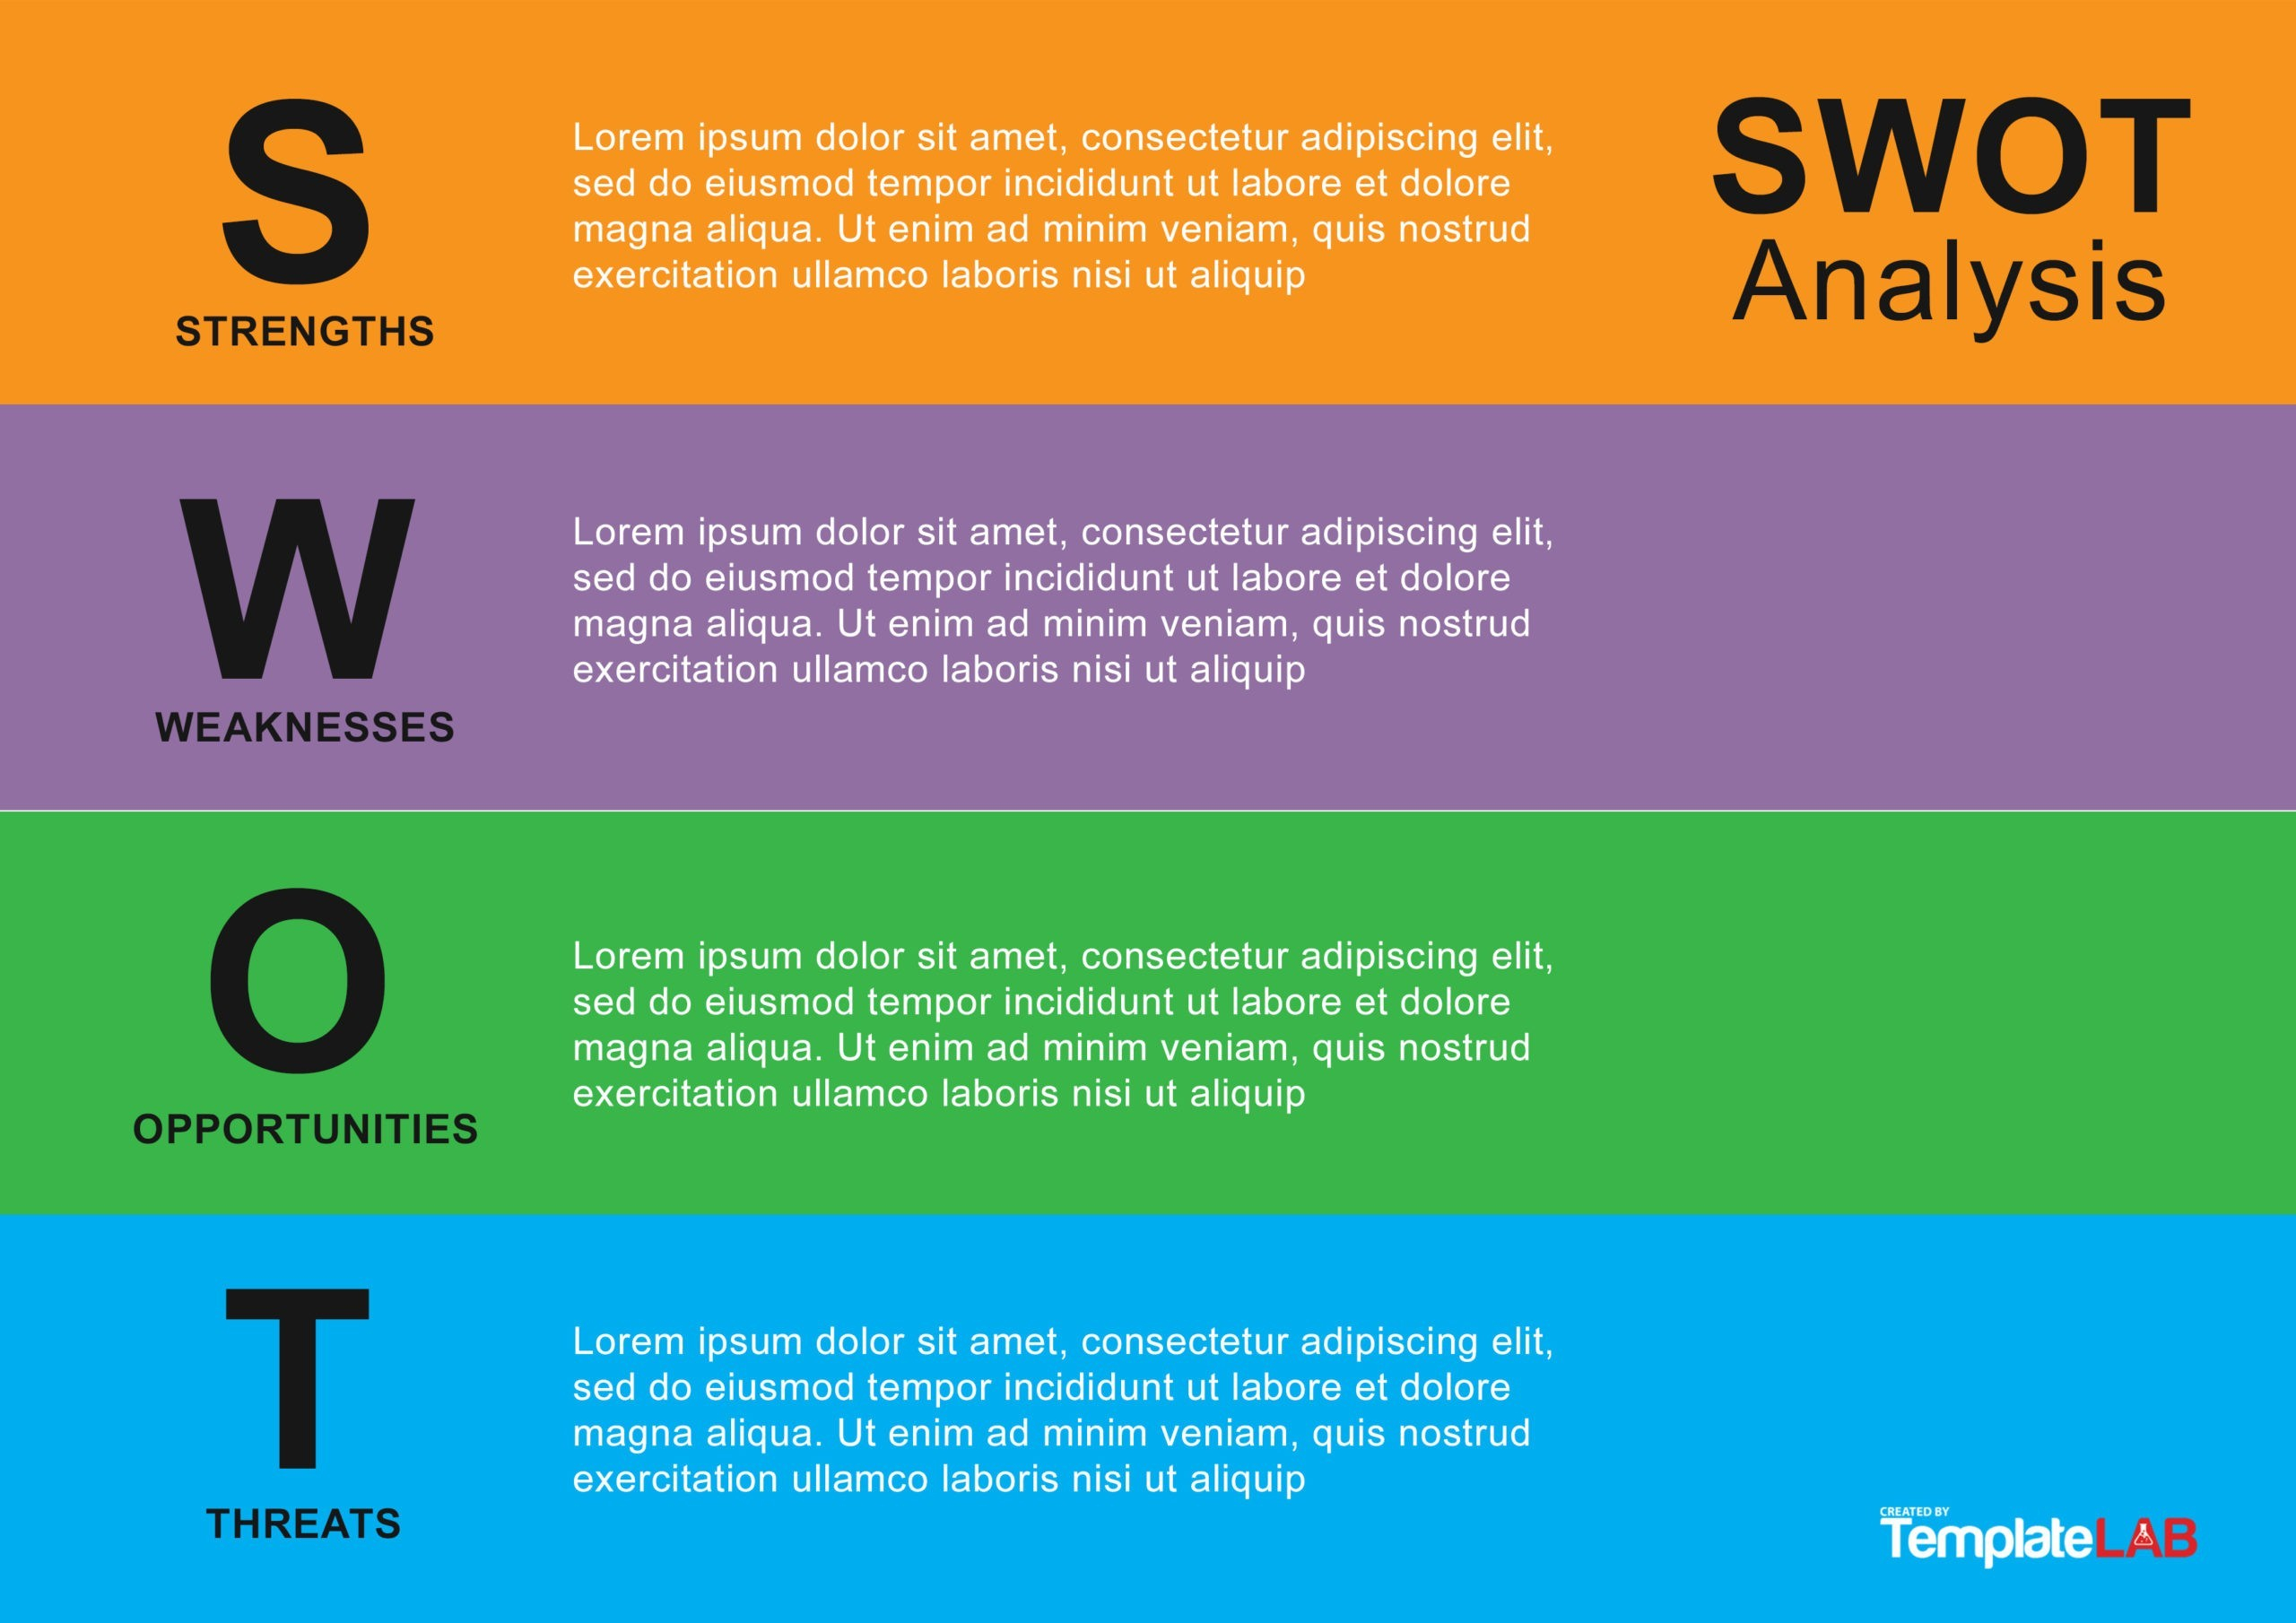 11 Powerful SWOT Analysis Templates & Examples Throughout Strategic Analysis Report Template Throughout Strategic Analysis Report Template